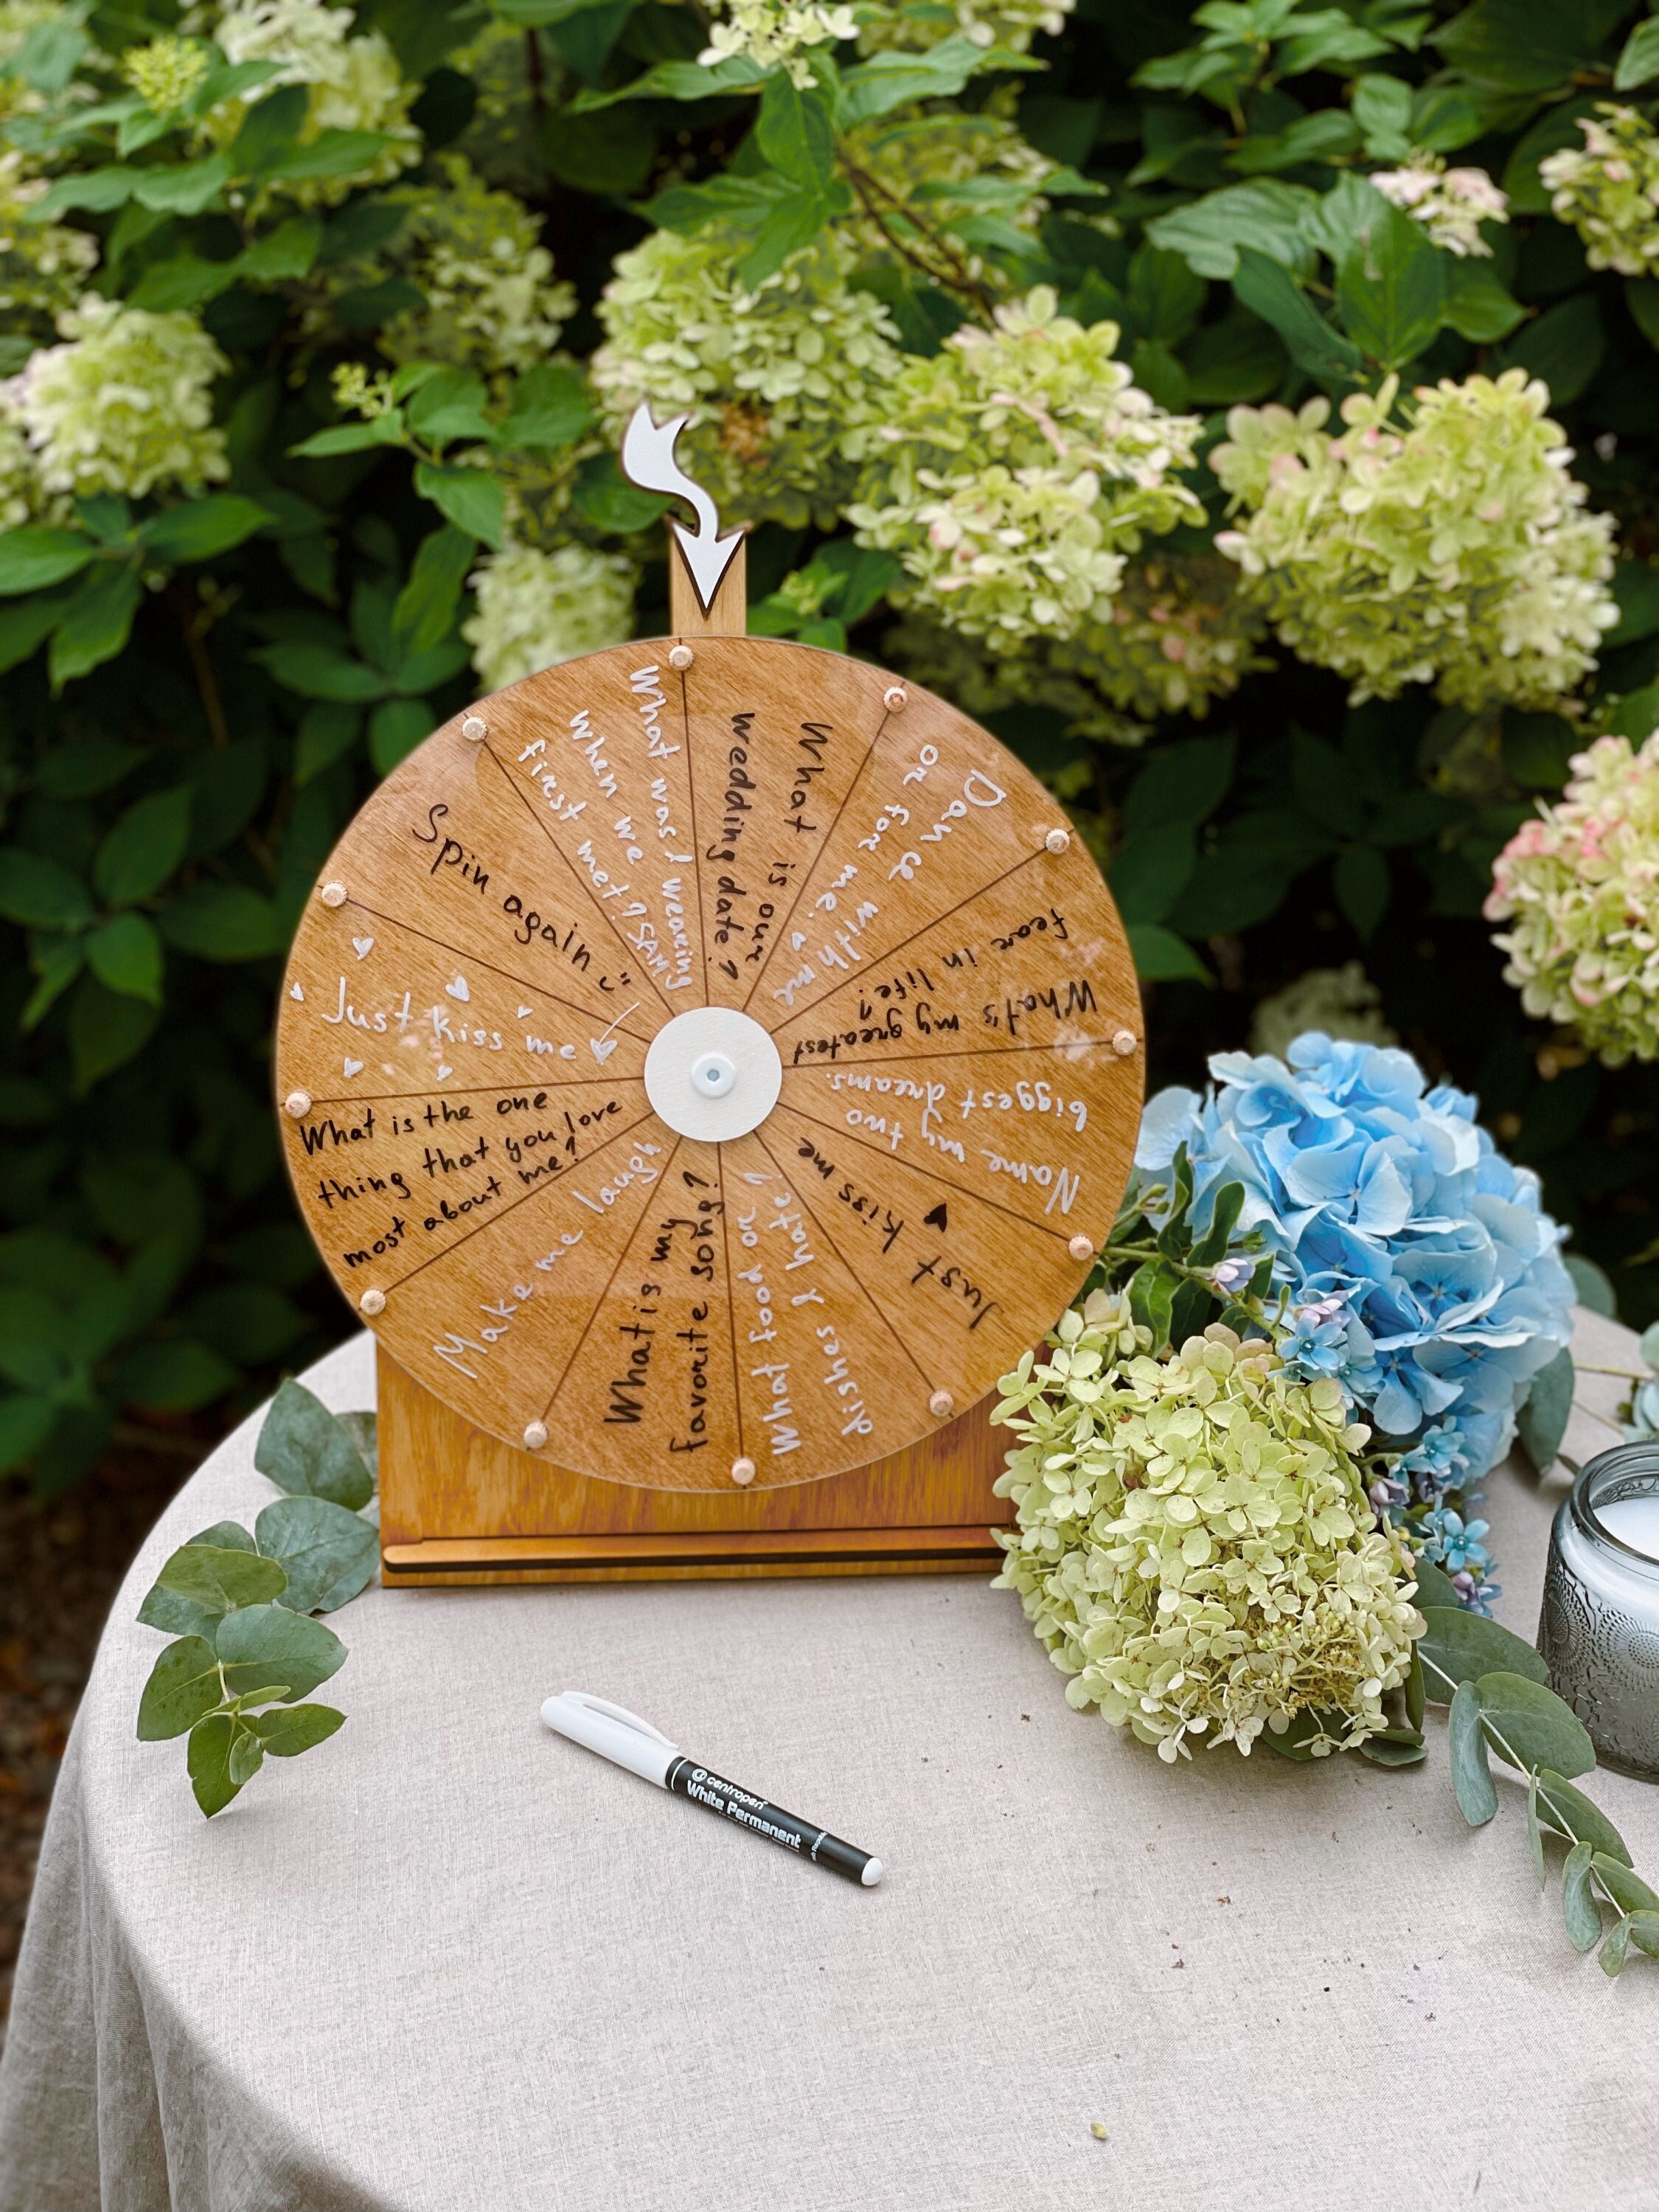 Personalized Birthday Party Games, Board Games, Wooden Spin the Wheel Game  With Custom Ideas, Christmas Dry Erase Wheel, Wedding Games 